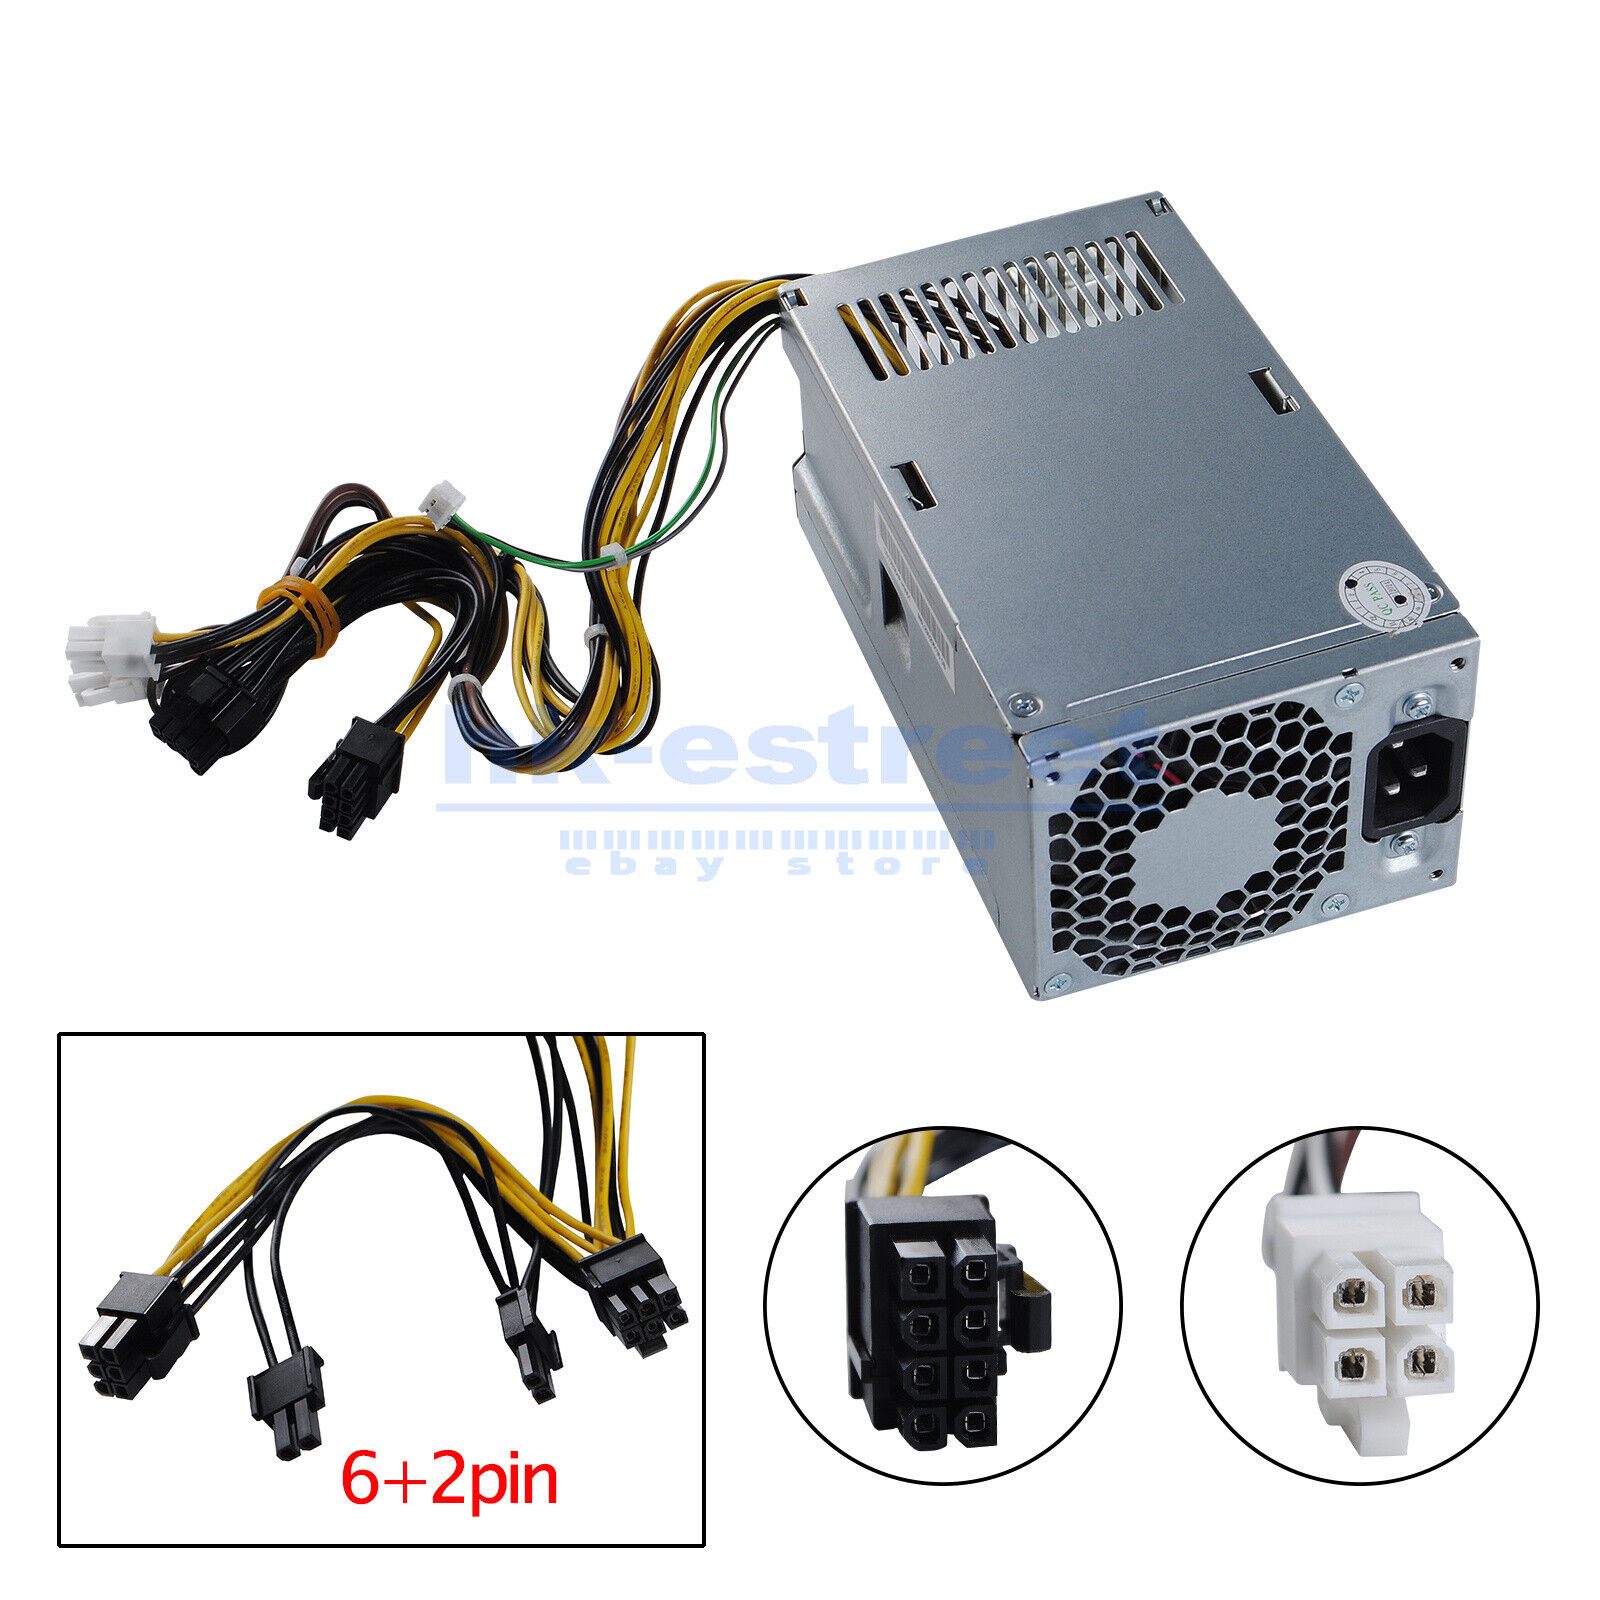 New For HP ProDesk 280 288 G3 310W DPS-310AB-1A PCG007 Power Supply 901772-004